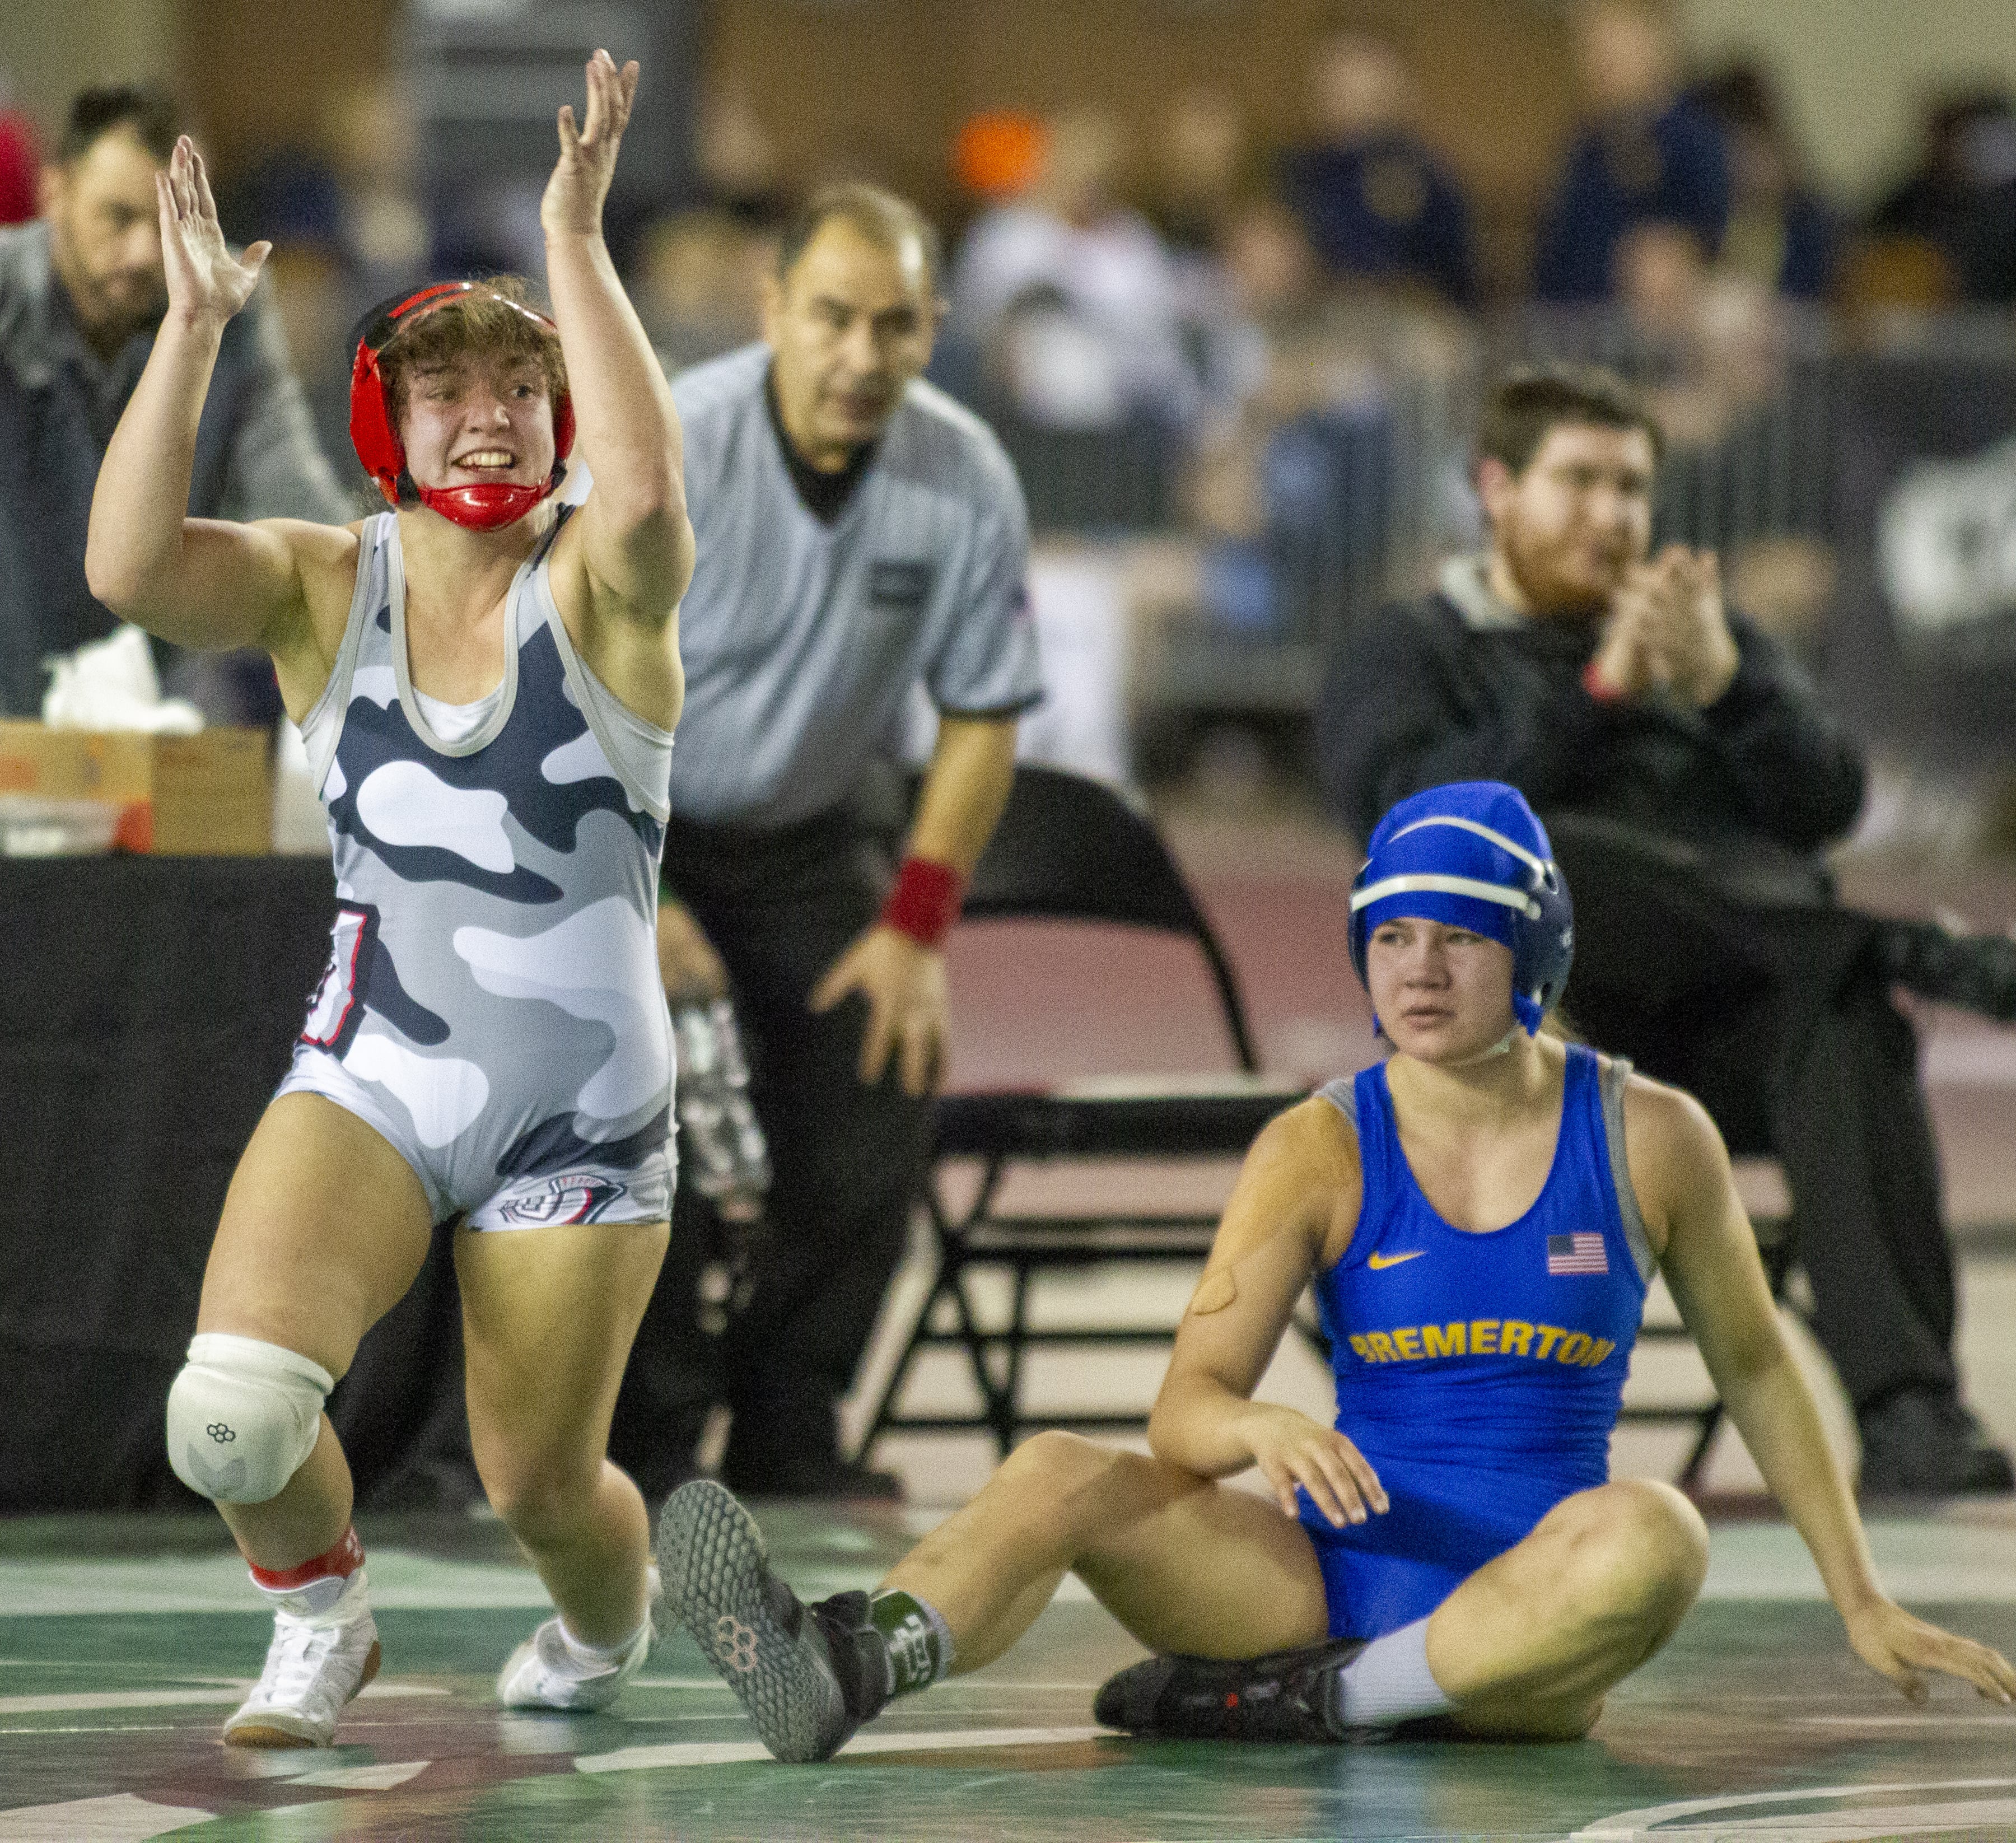 Union's Krista Warren celebrates her 21-1over Bremerton Girls Haley Michaelson, in their Girls 140-pound Championship match on Saturday, February 16, 2019 at the Mat Classic XXXI Championships held in the Tacoma Dome.